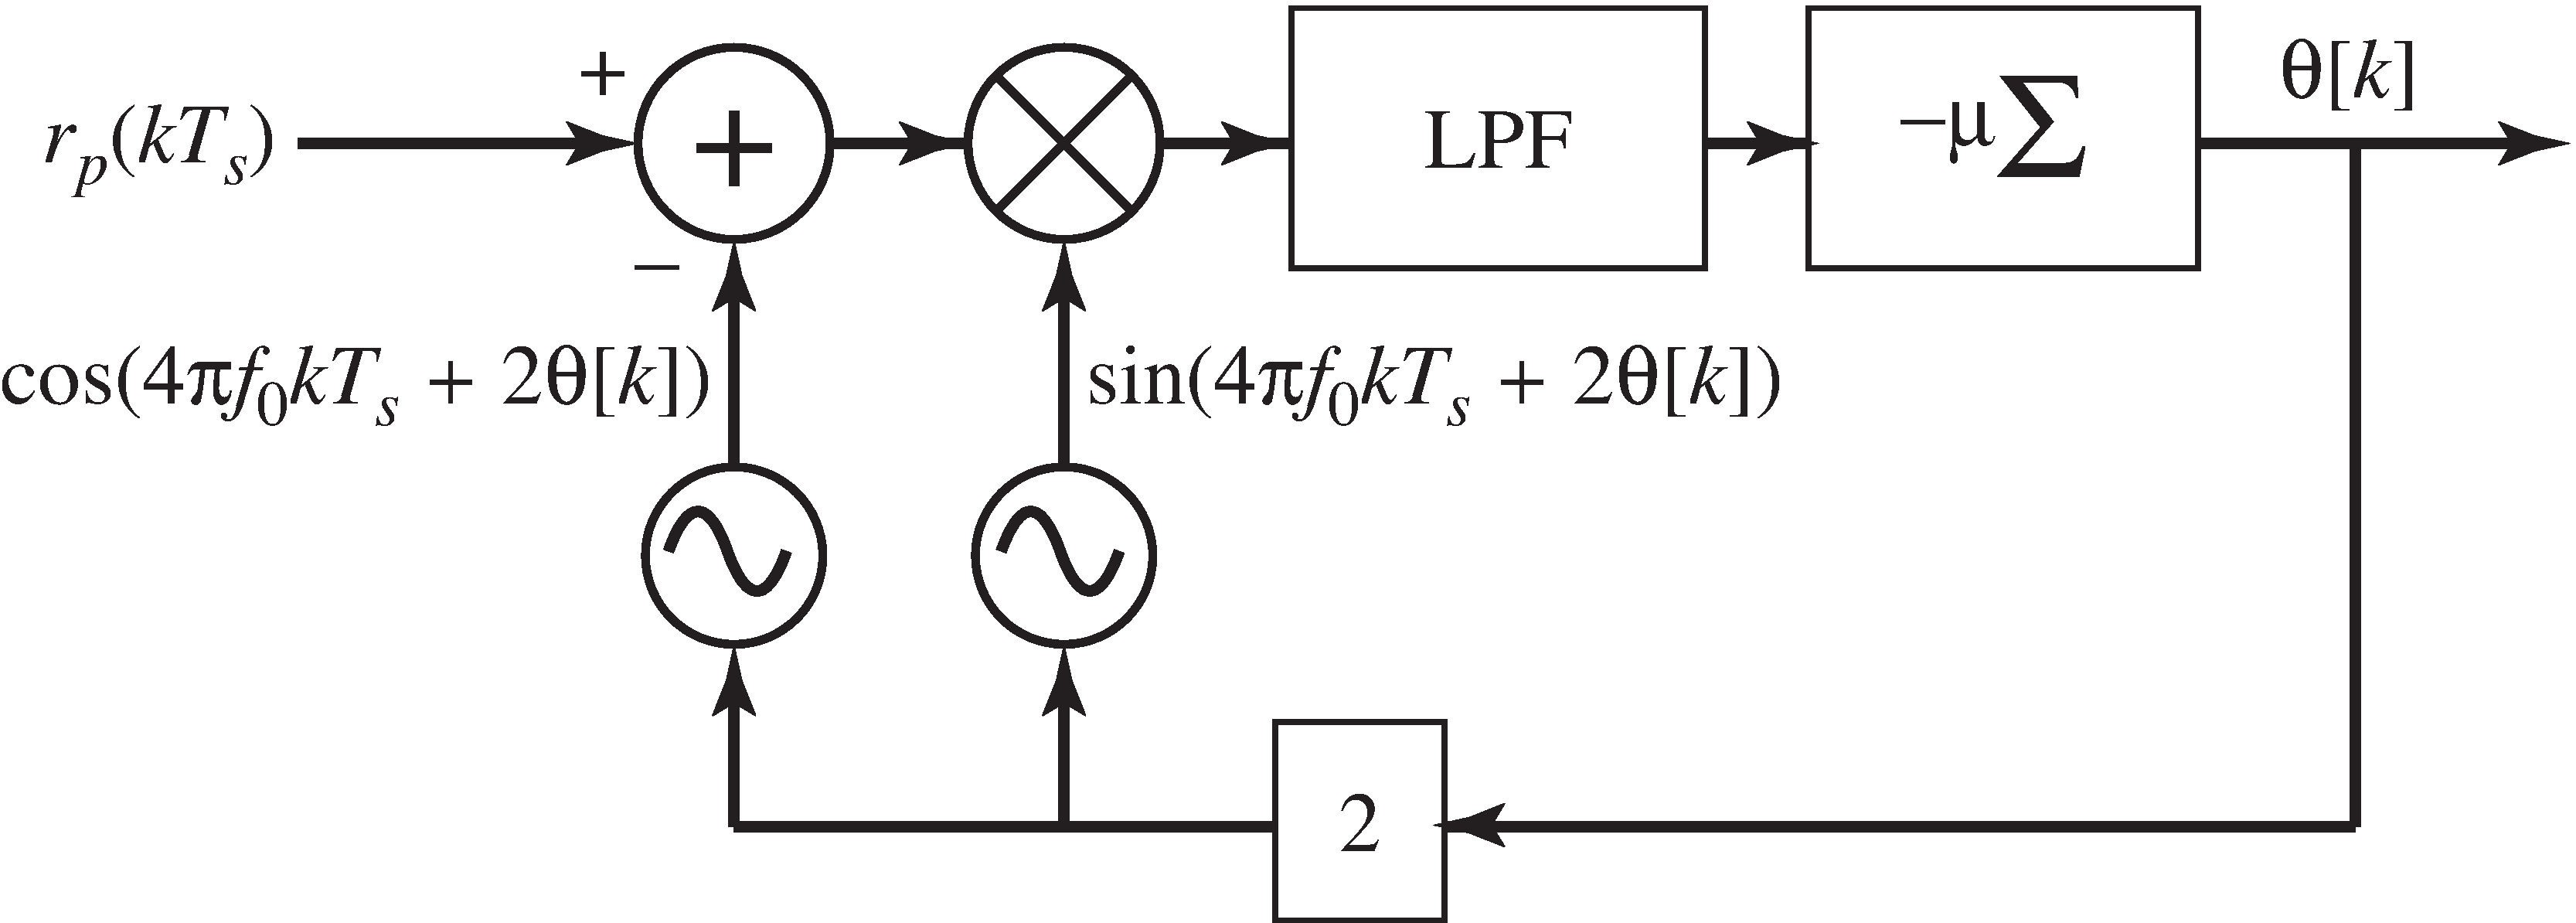 A block diagram of the squared difference phase tracking algorithm Equation 11. The input r_p(kT_s) is a preprocessed version of the received signal as shown in Figure 10-3. The integrator block Σ has a lowpass character, and is equivalent to a sum and delay as shown in Figure 7-5.